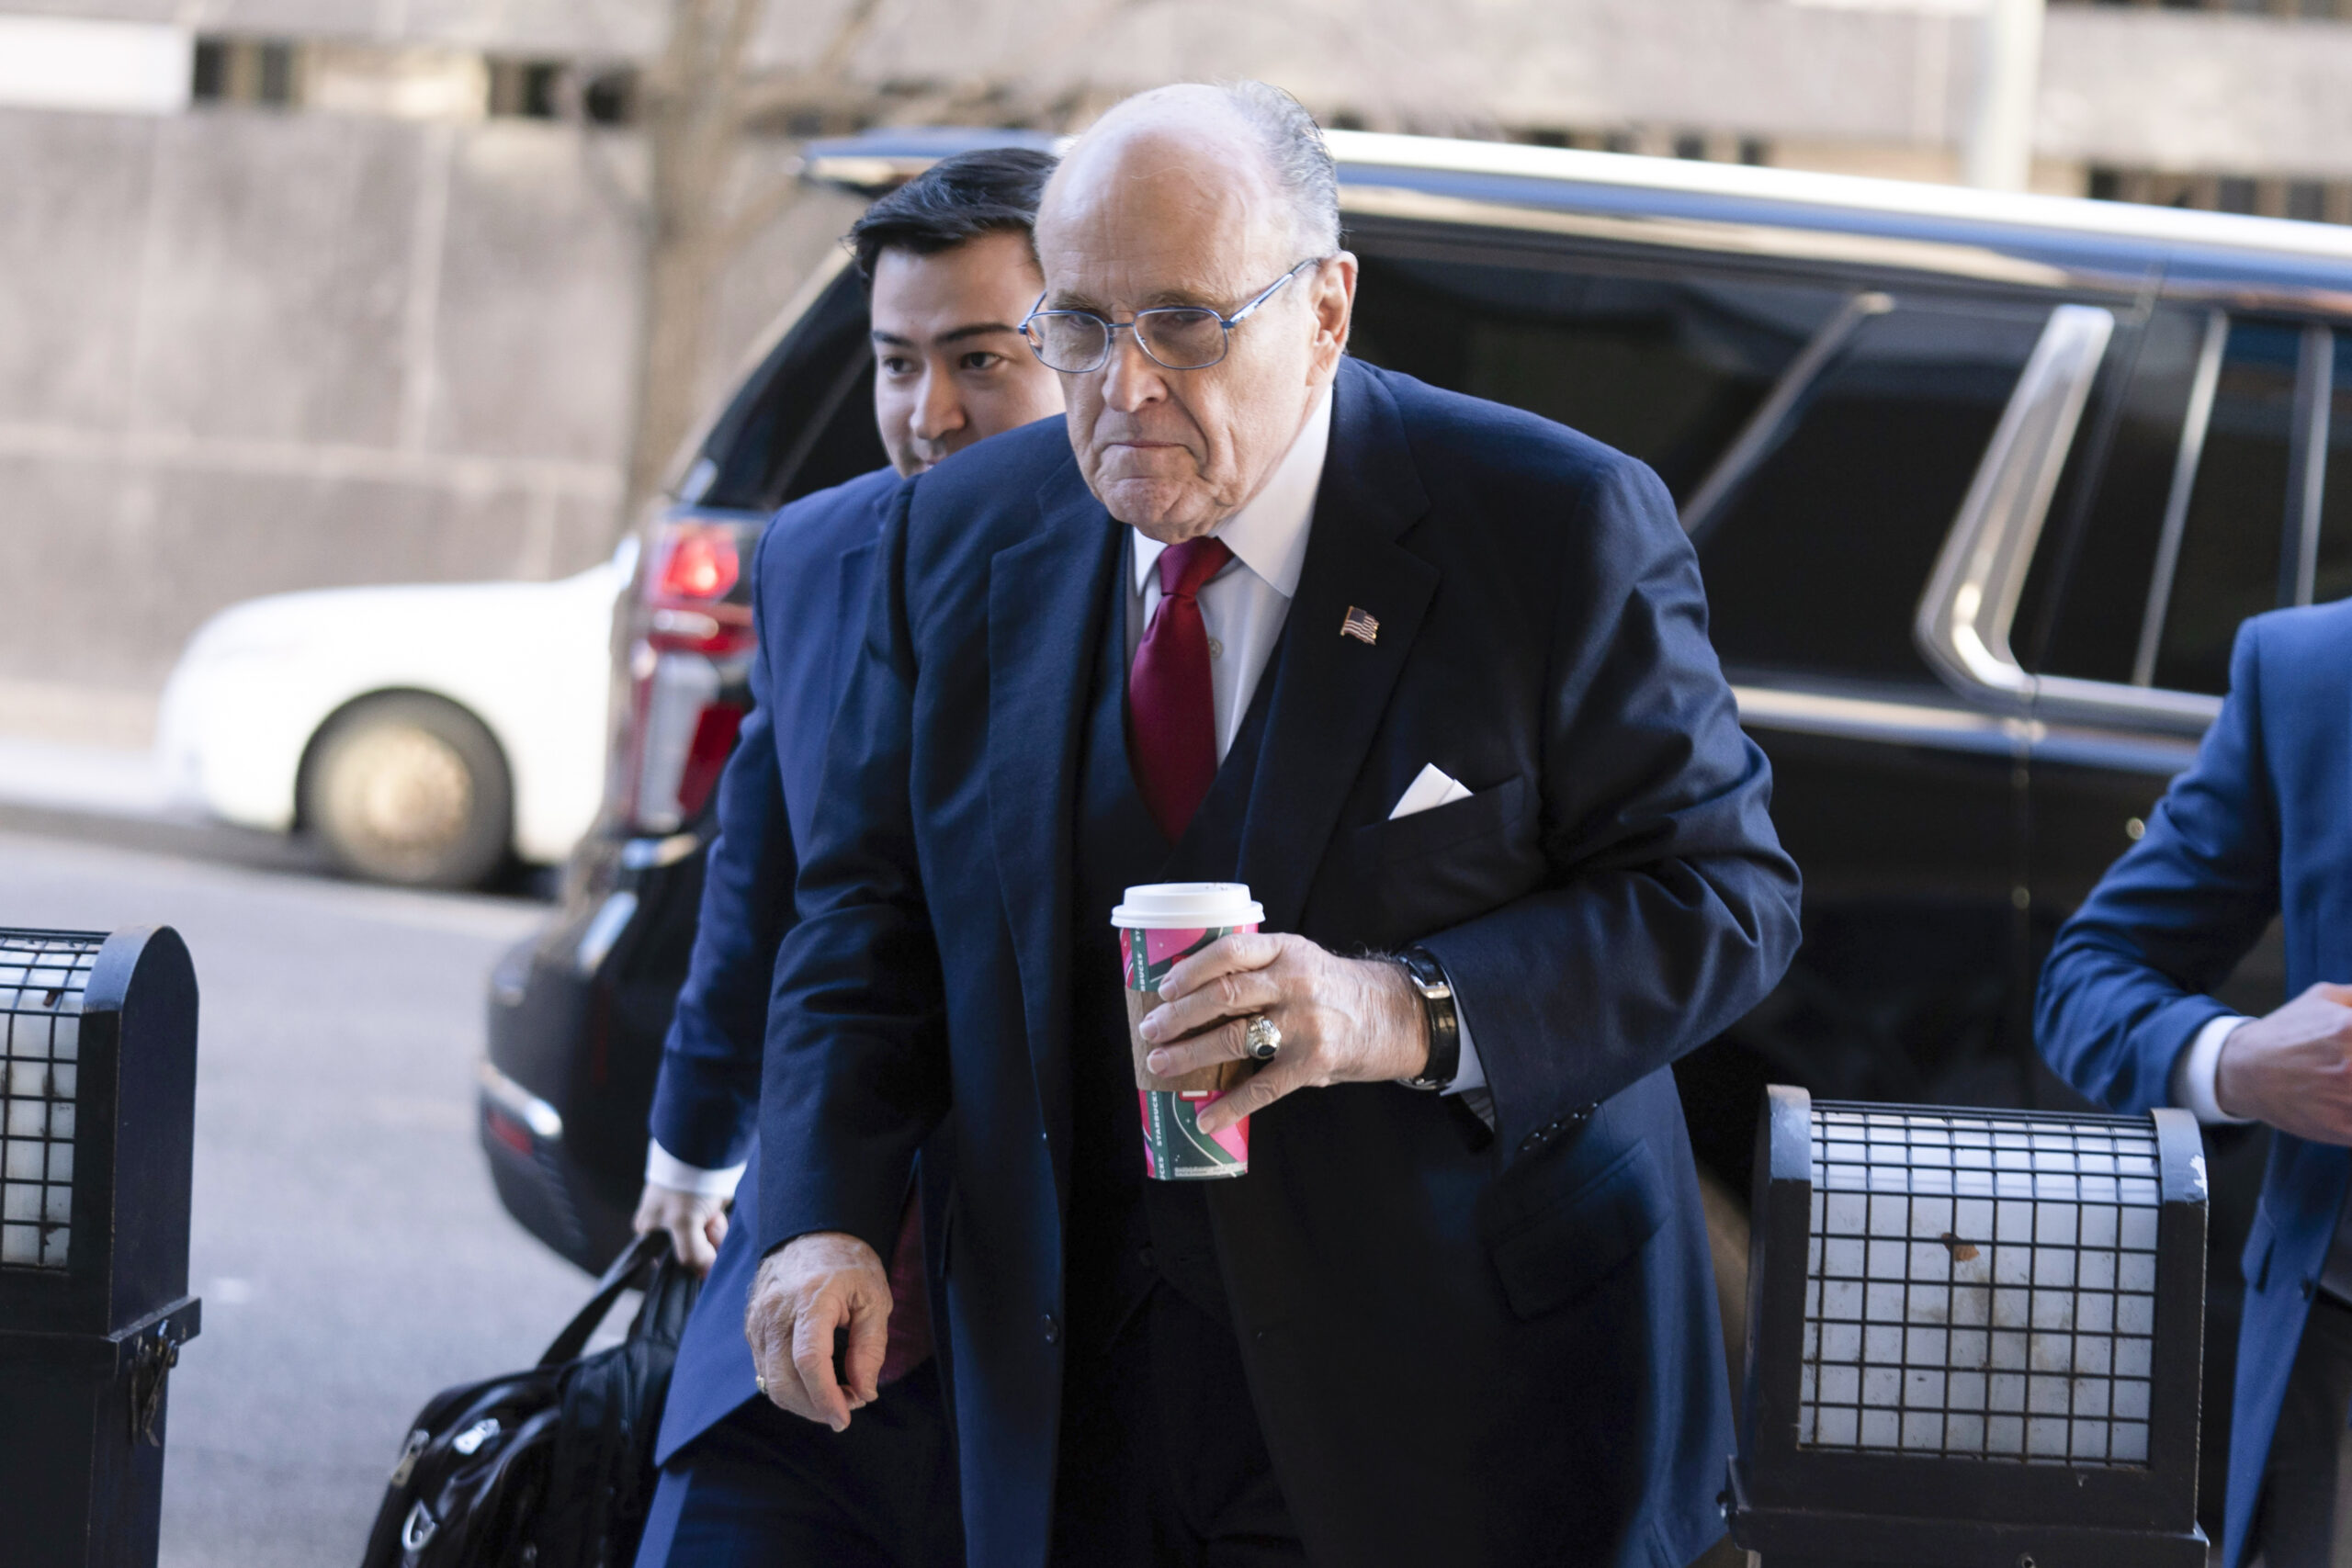 Former Mayor of New York Rudy Giuliani arrives at the federal courthouse in Washington, Friday, Dec...